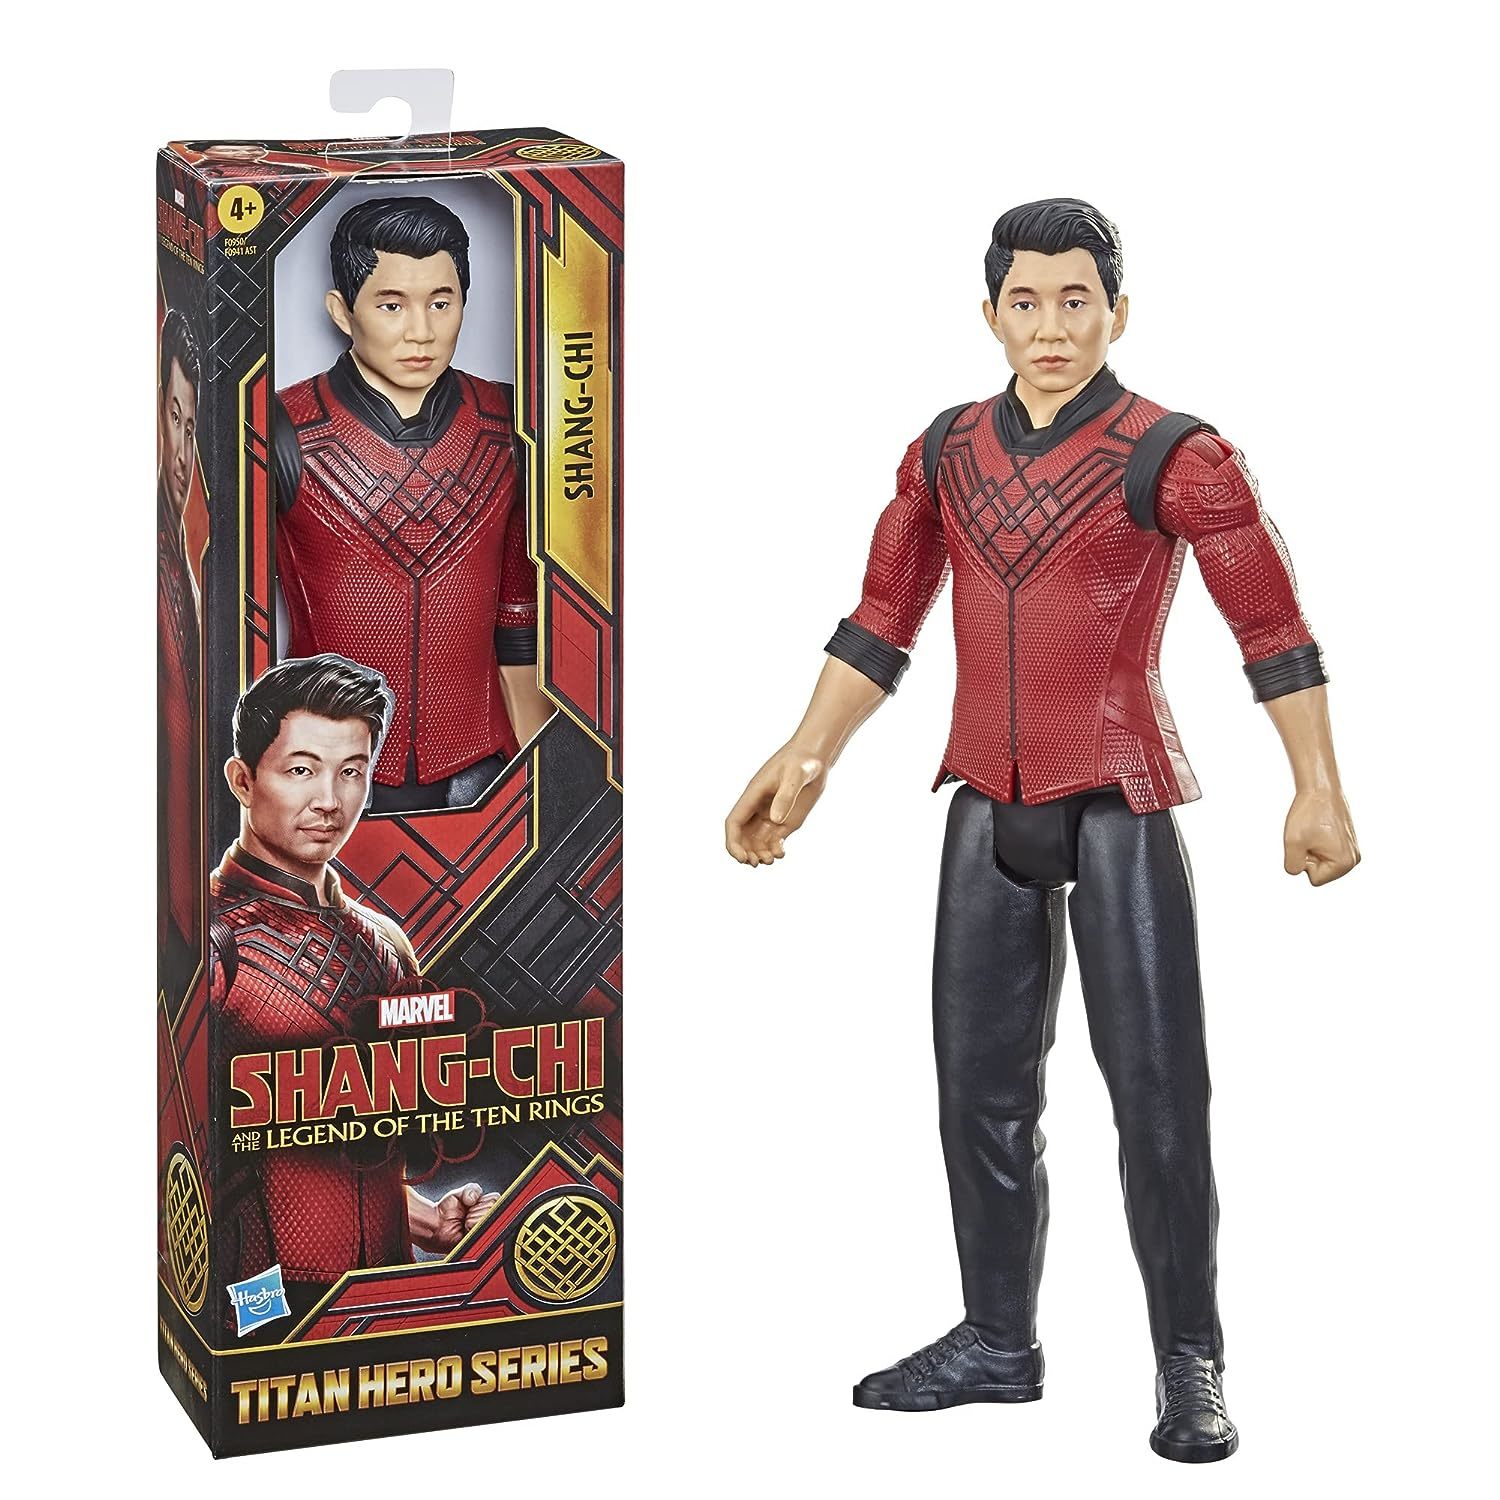 Primary image for Marvel Hasbro Titan Hero Series Shang-Chi and The Legend of The Ten Rings Action